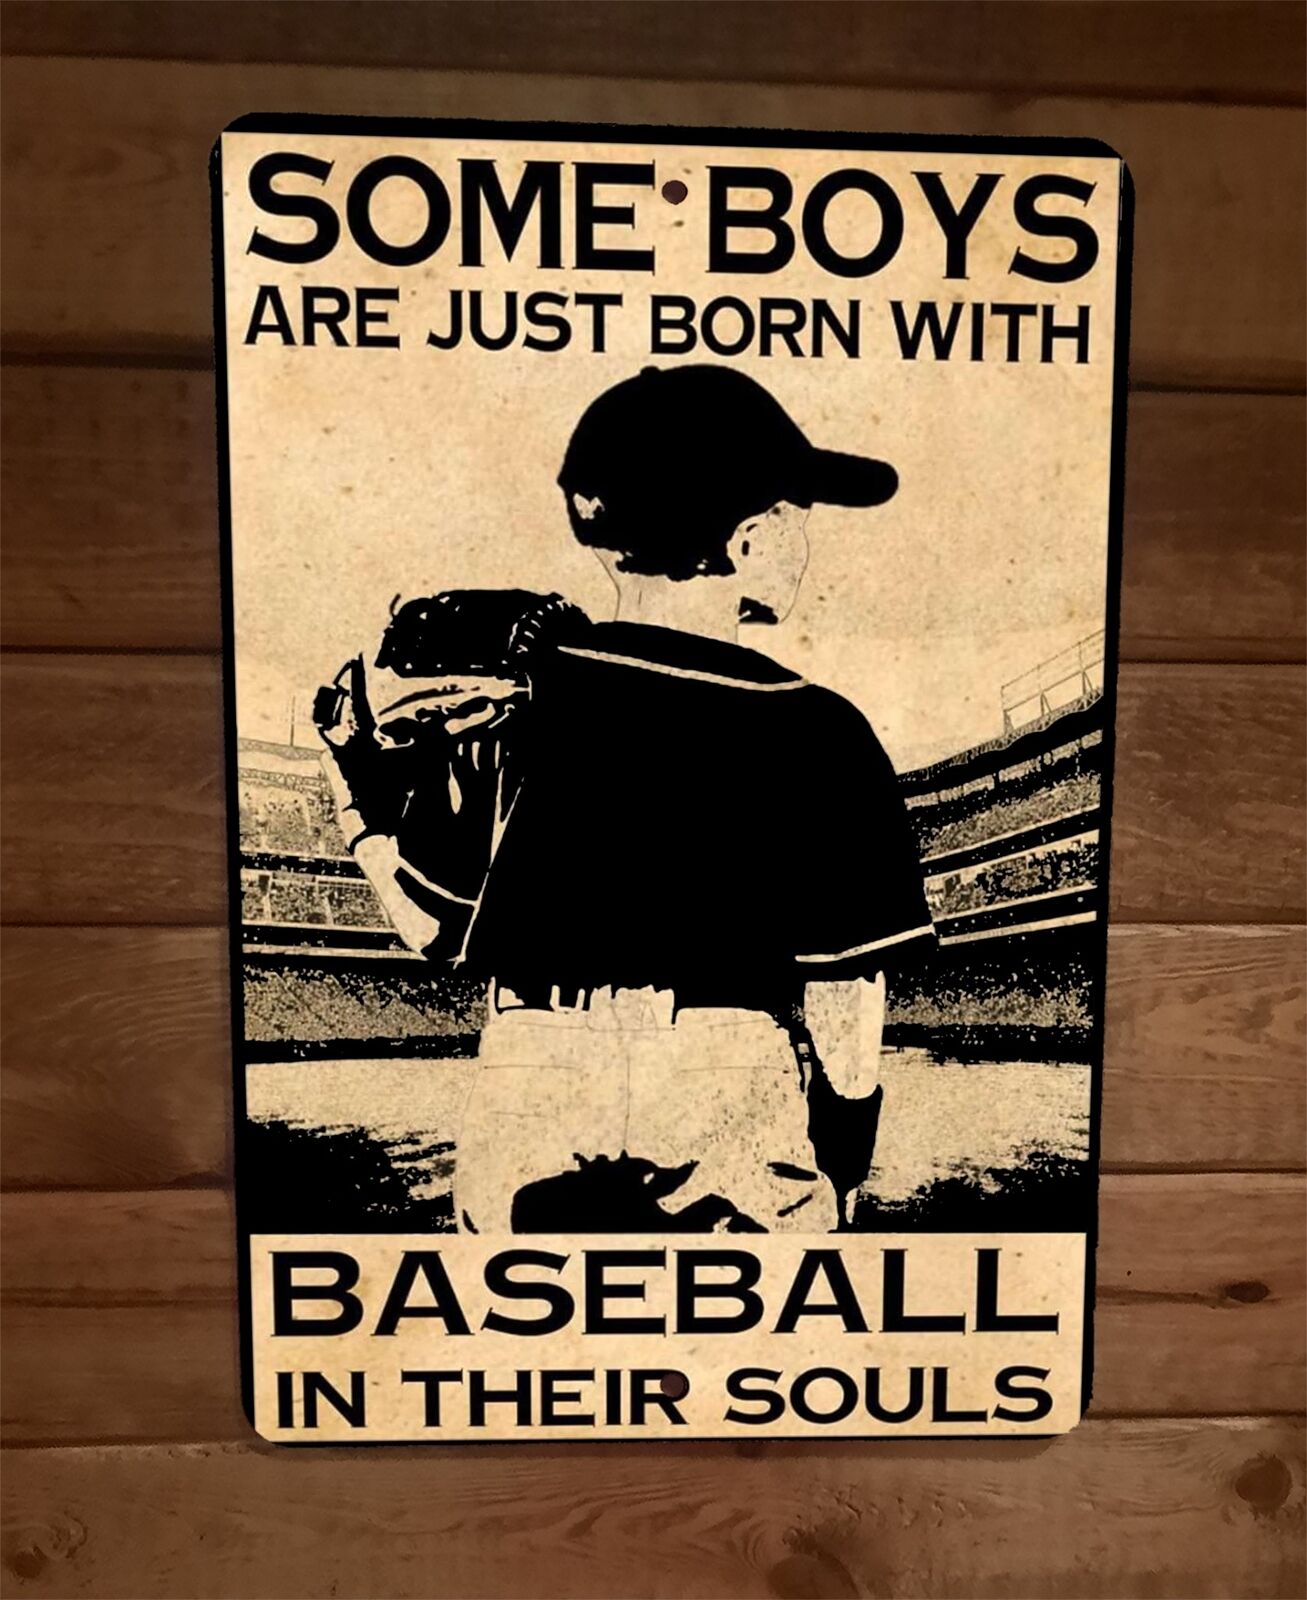 Some Boys Are Just Born With Baseball in Their Souls 8x12 Metal Wall Sign Poster